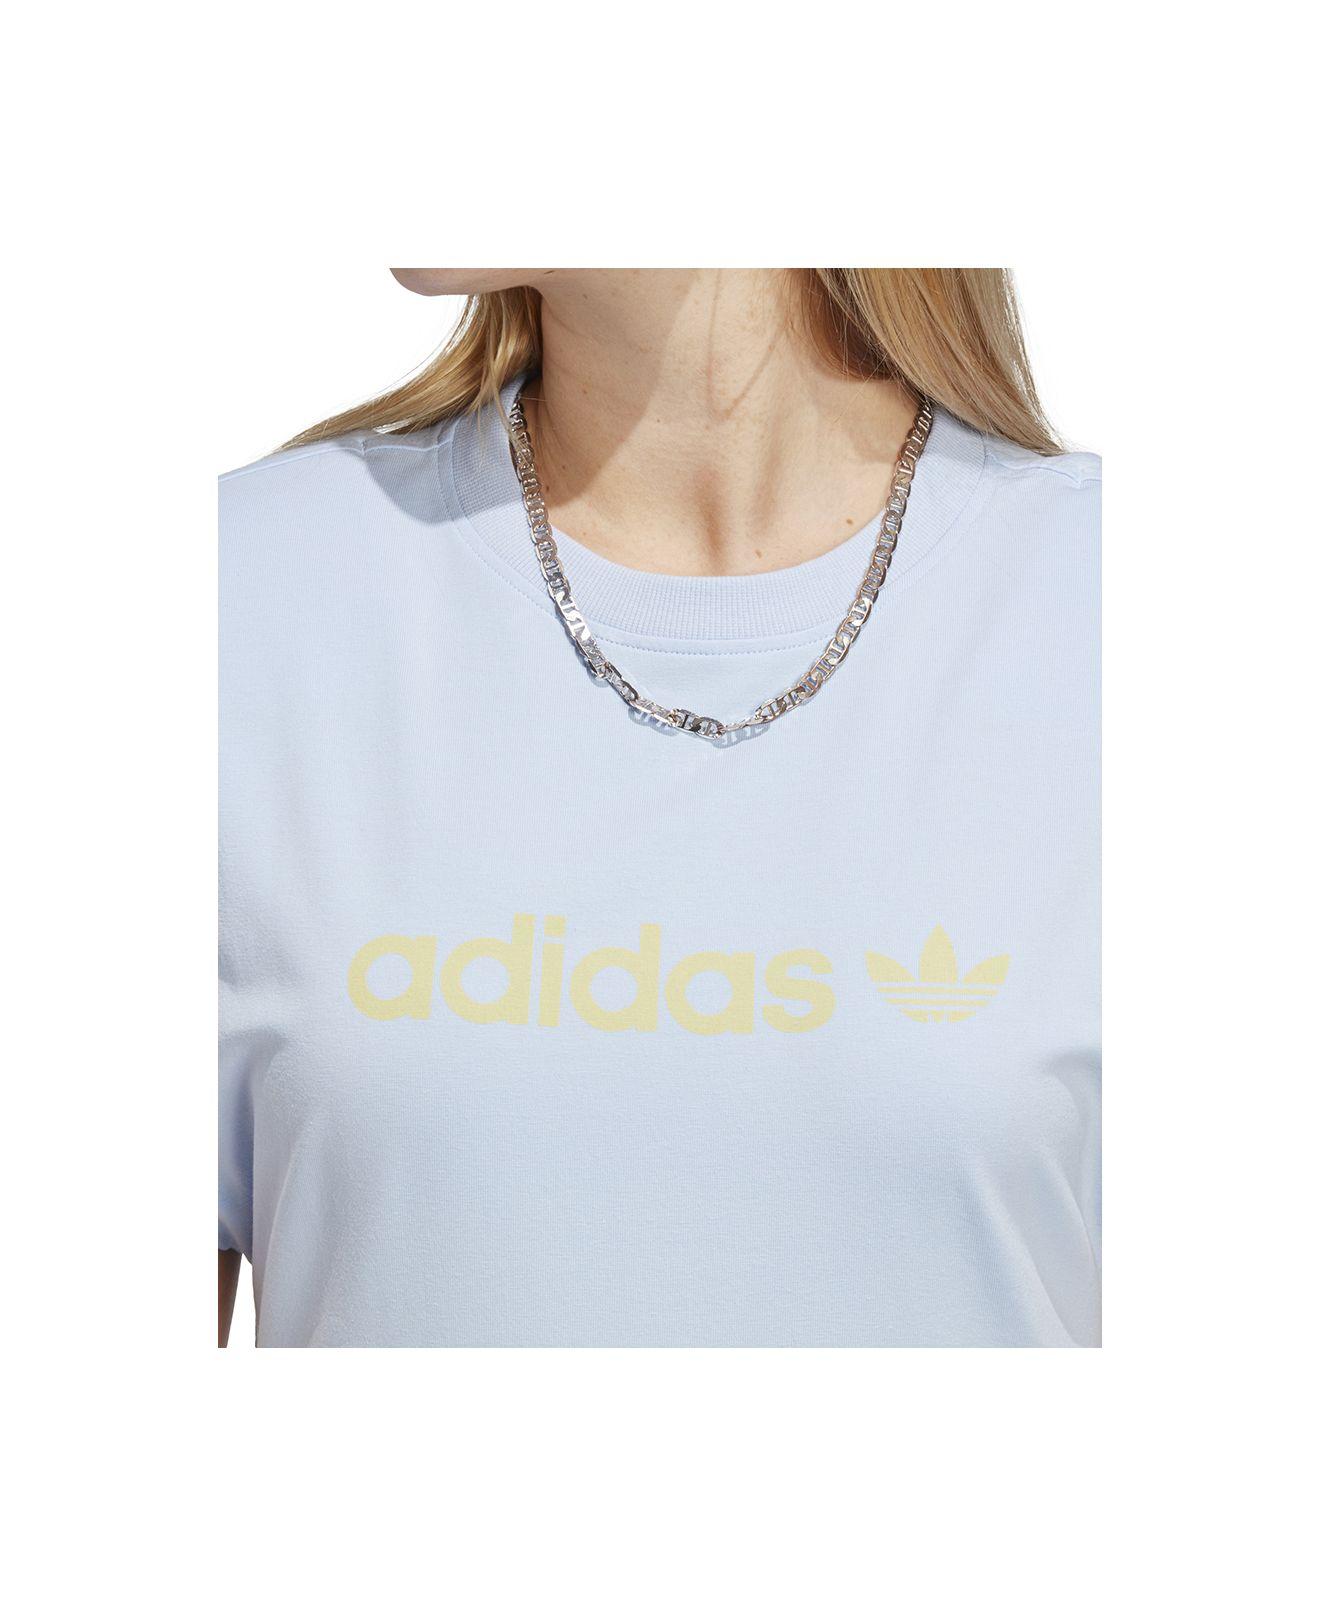 adidas Originals Muscle Fit Pullover Dress in Blue | Lyst